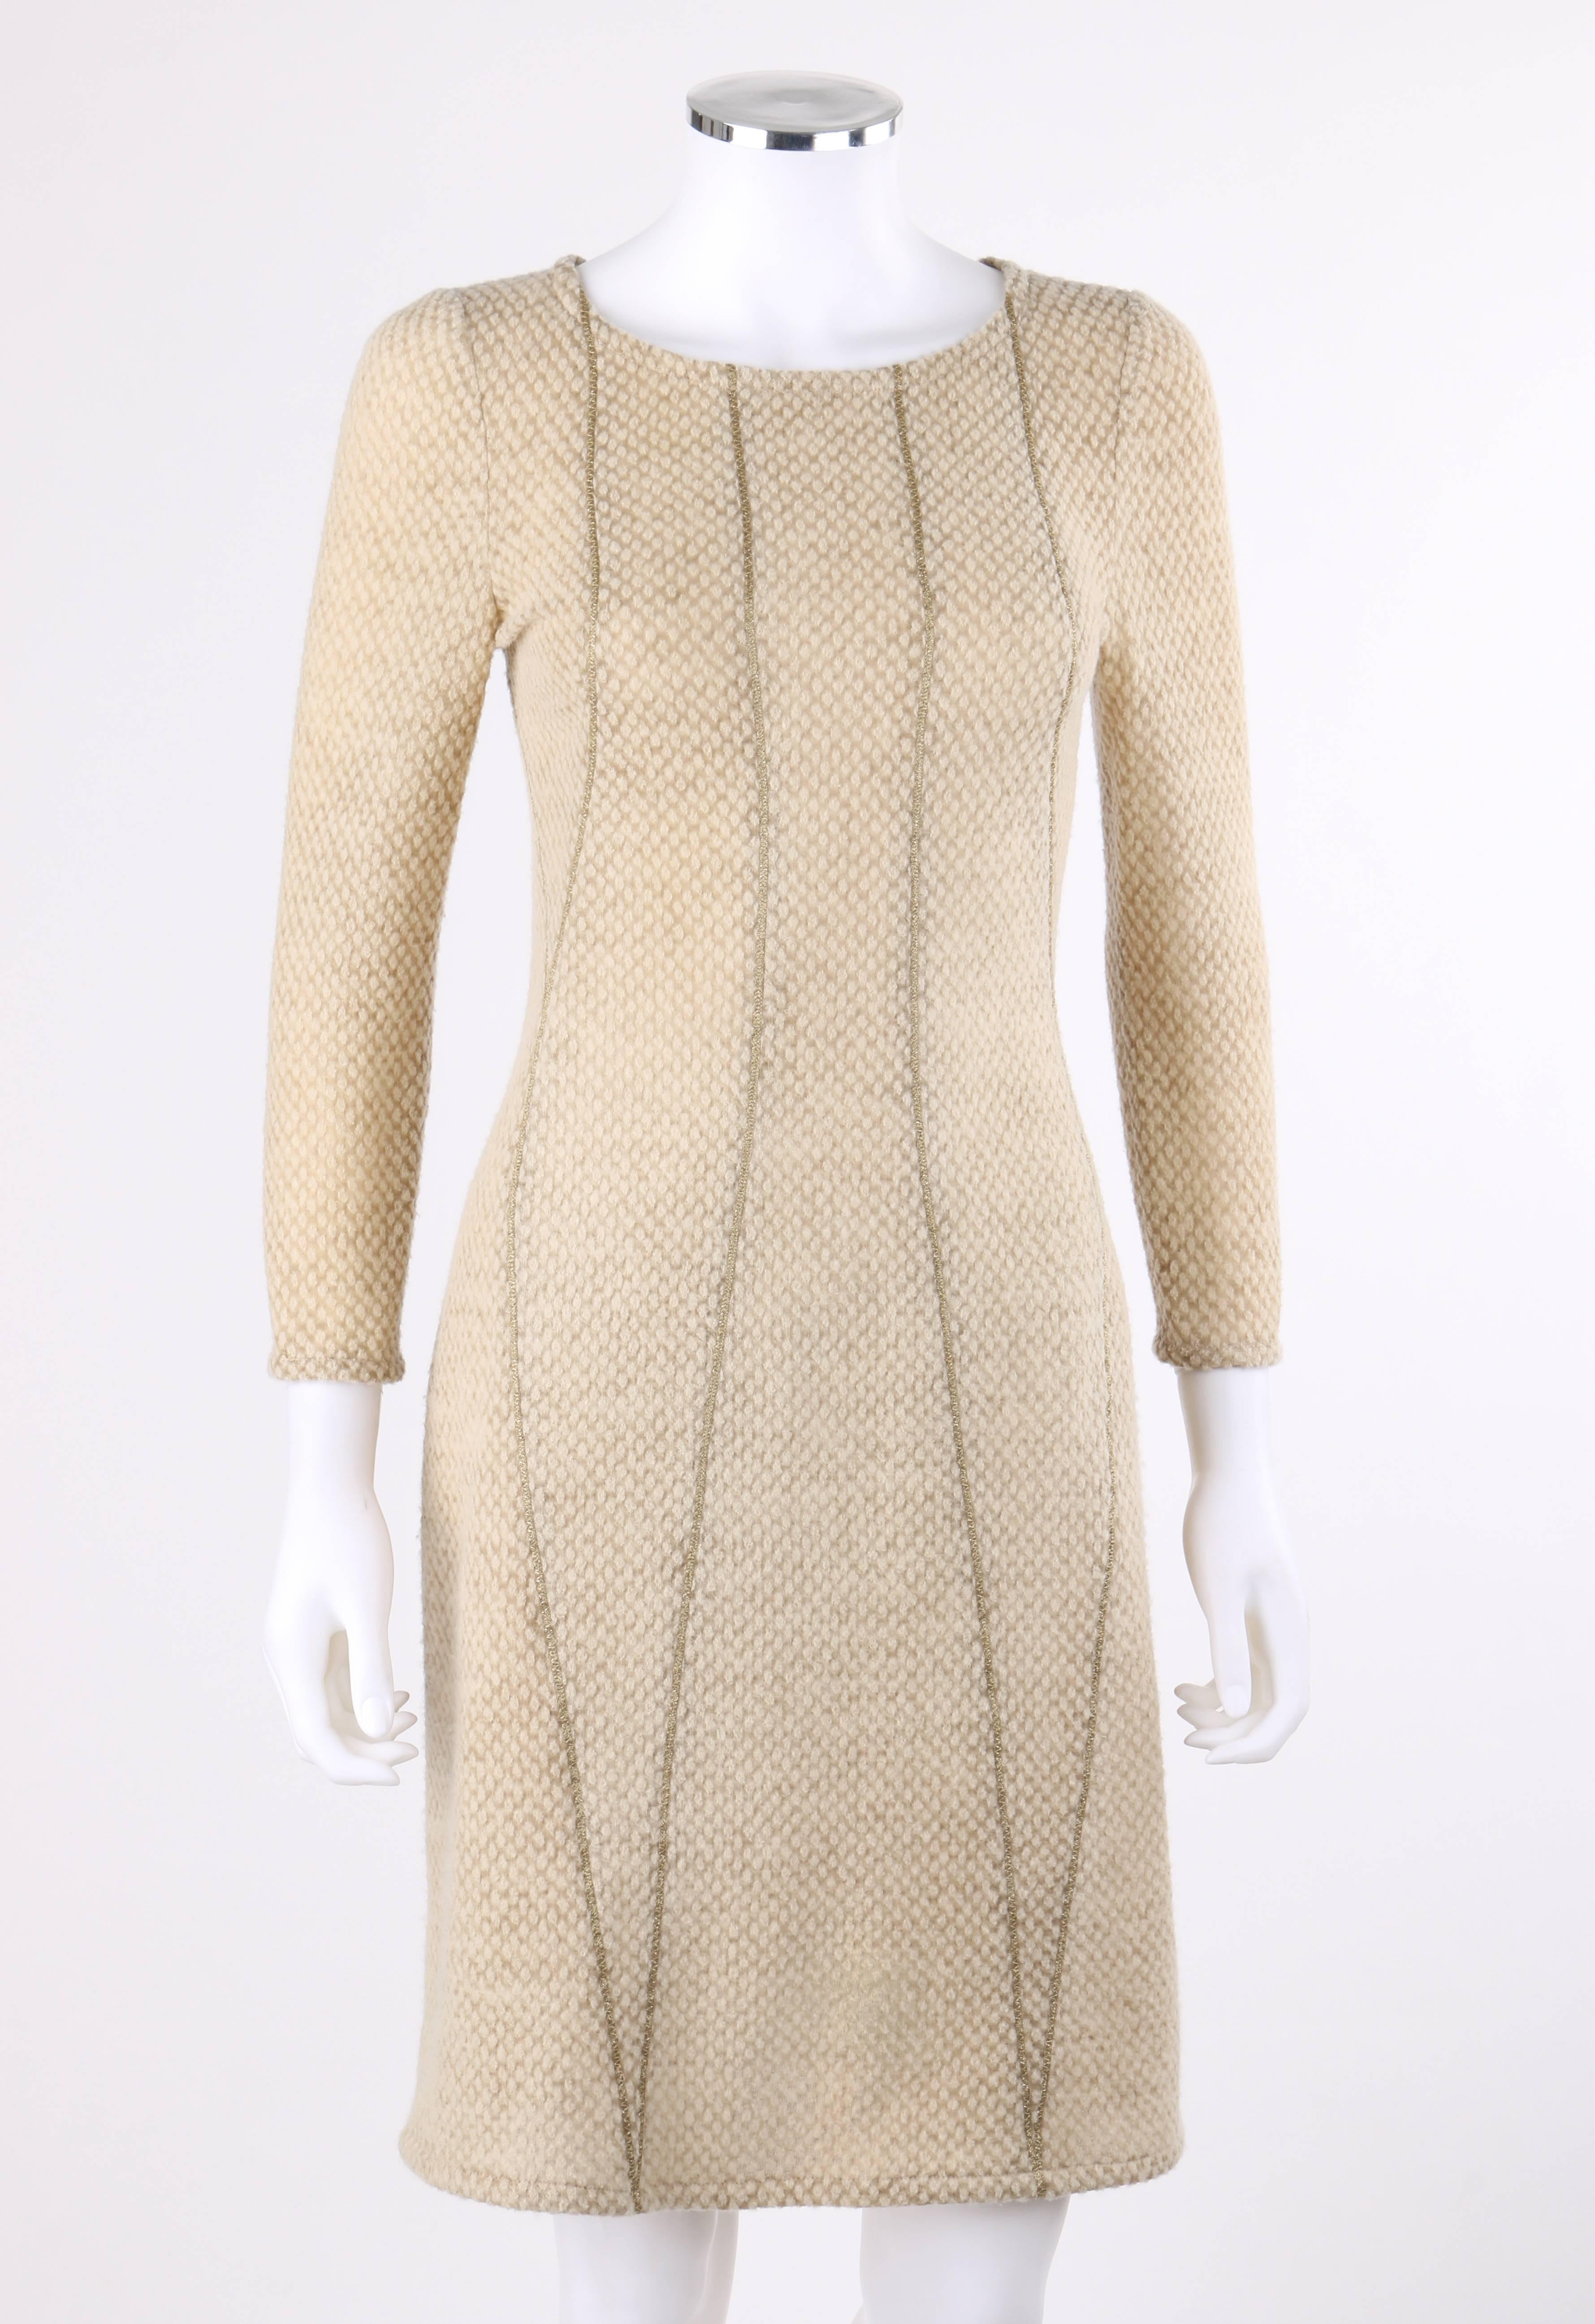 Bottega Veneta Autumn/Winter 2011 beige textured wool blend panel cocktail dress. Wide scoop neckline. 3/4 length sleeves. Multiple panels with metallic gold flat piped seam detail. Shift style. Center back invisible zipper. Unlined. Unmarked Fabric